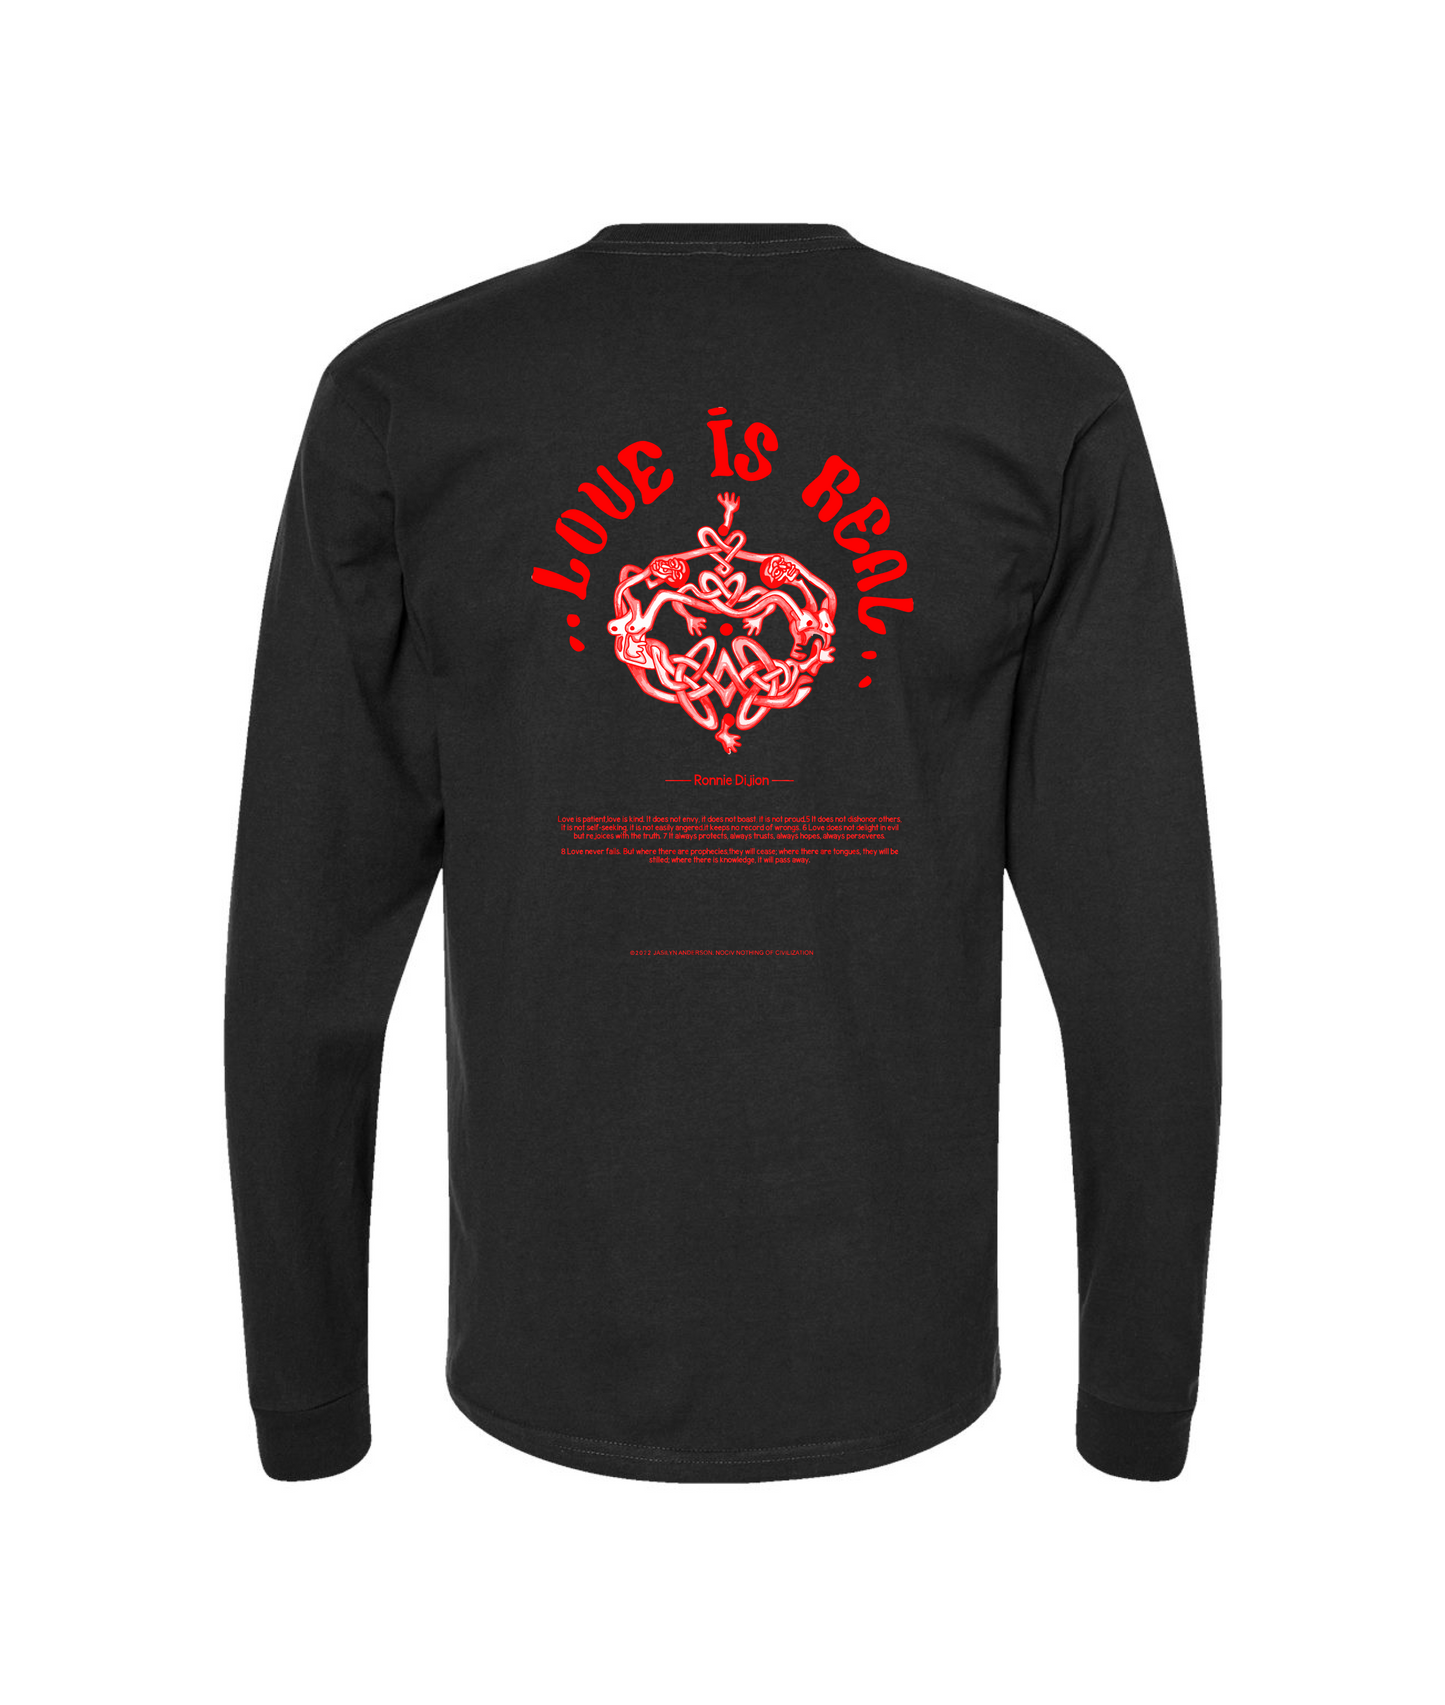 LOVE IS REAL - Logo w/White Highlights - Black Long Sleeve T